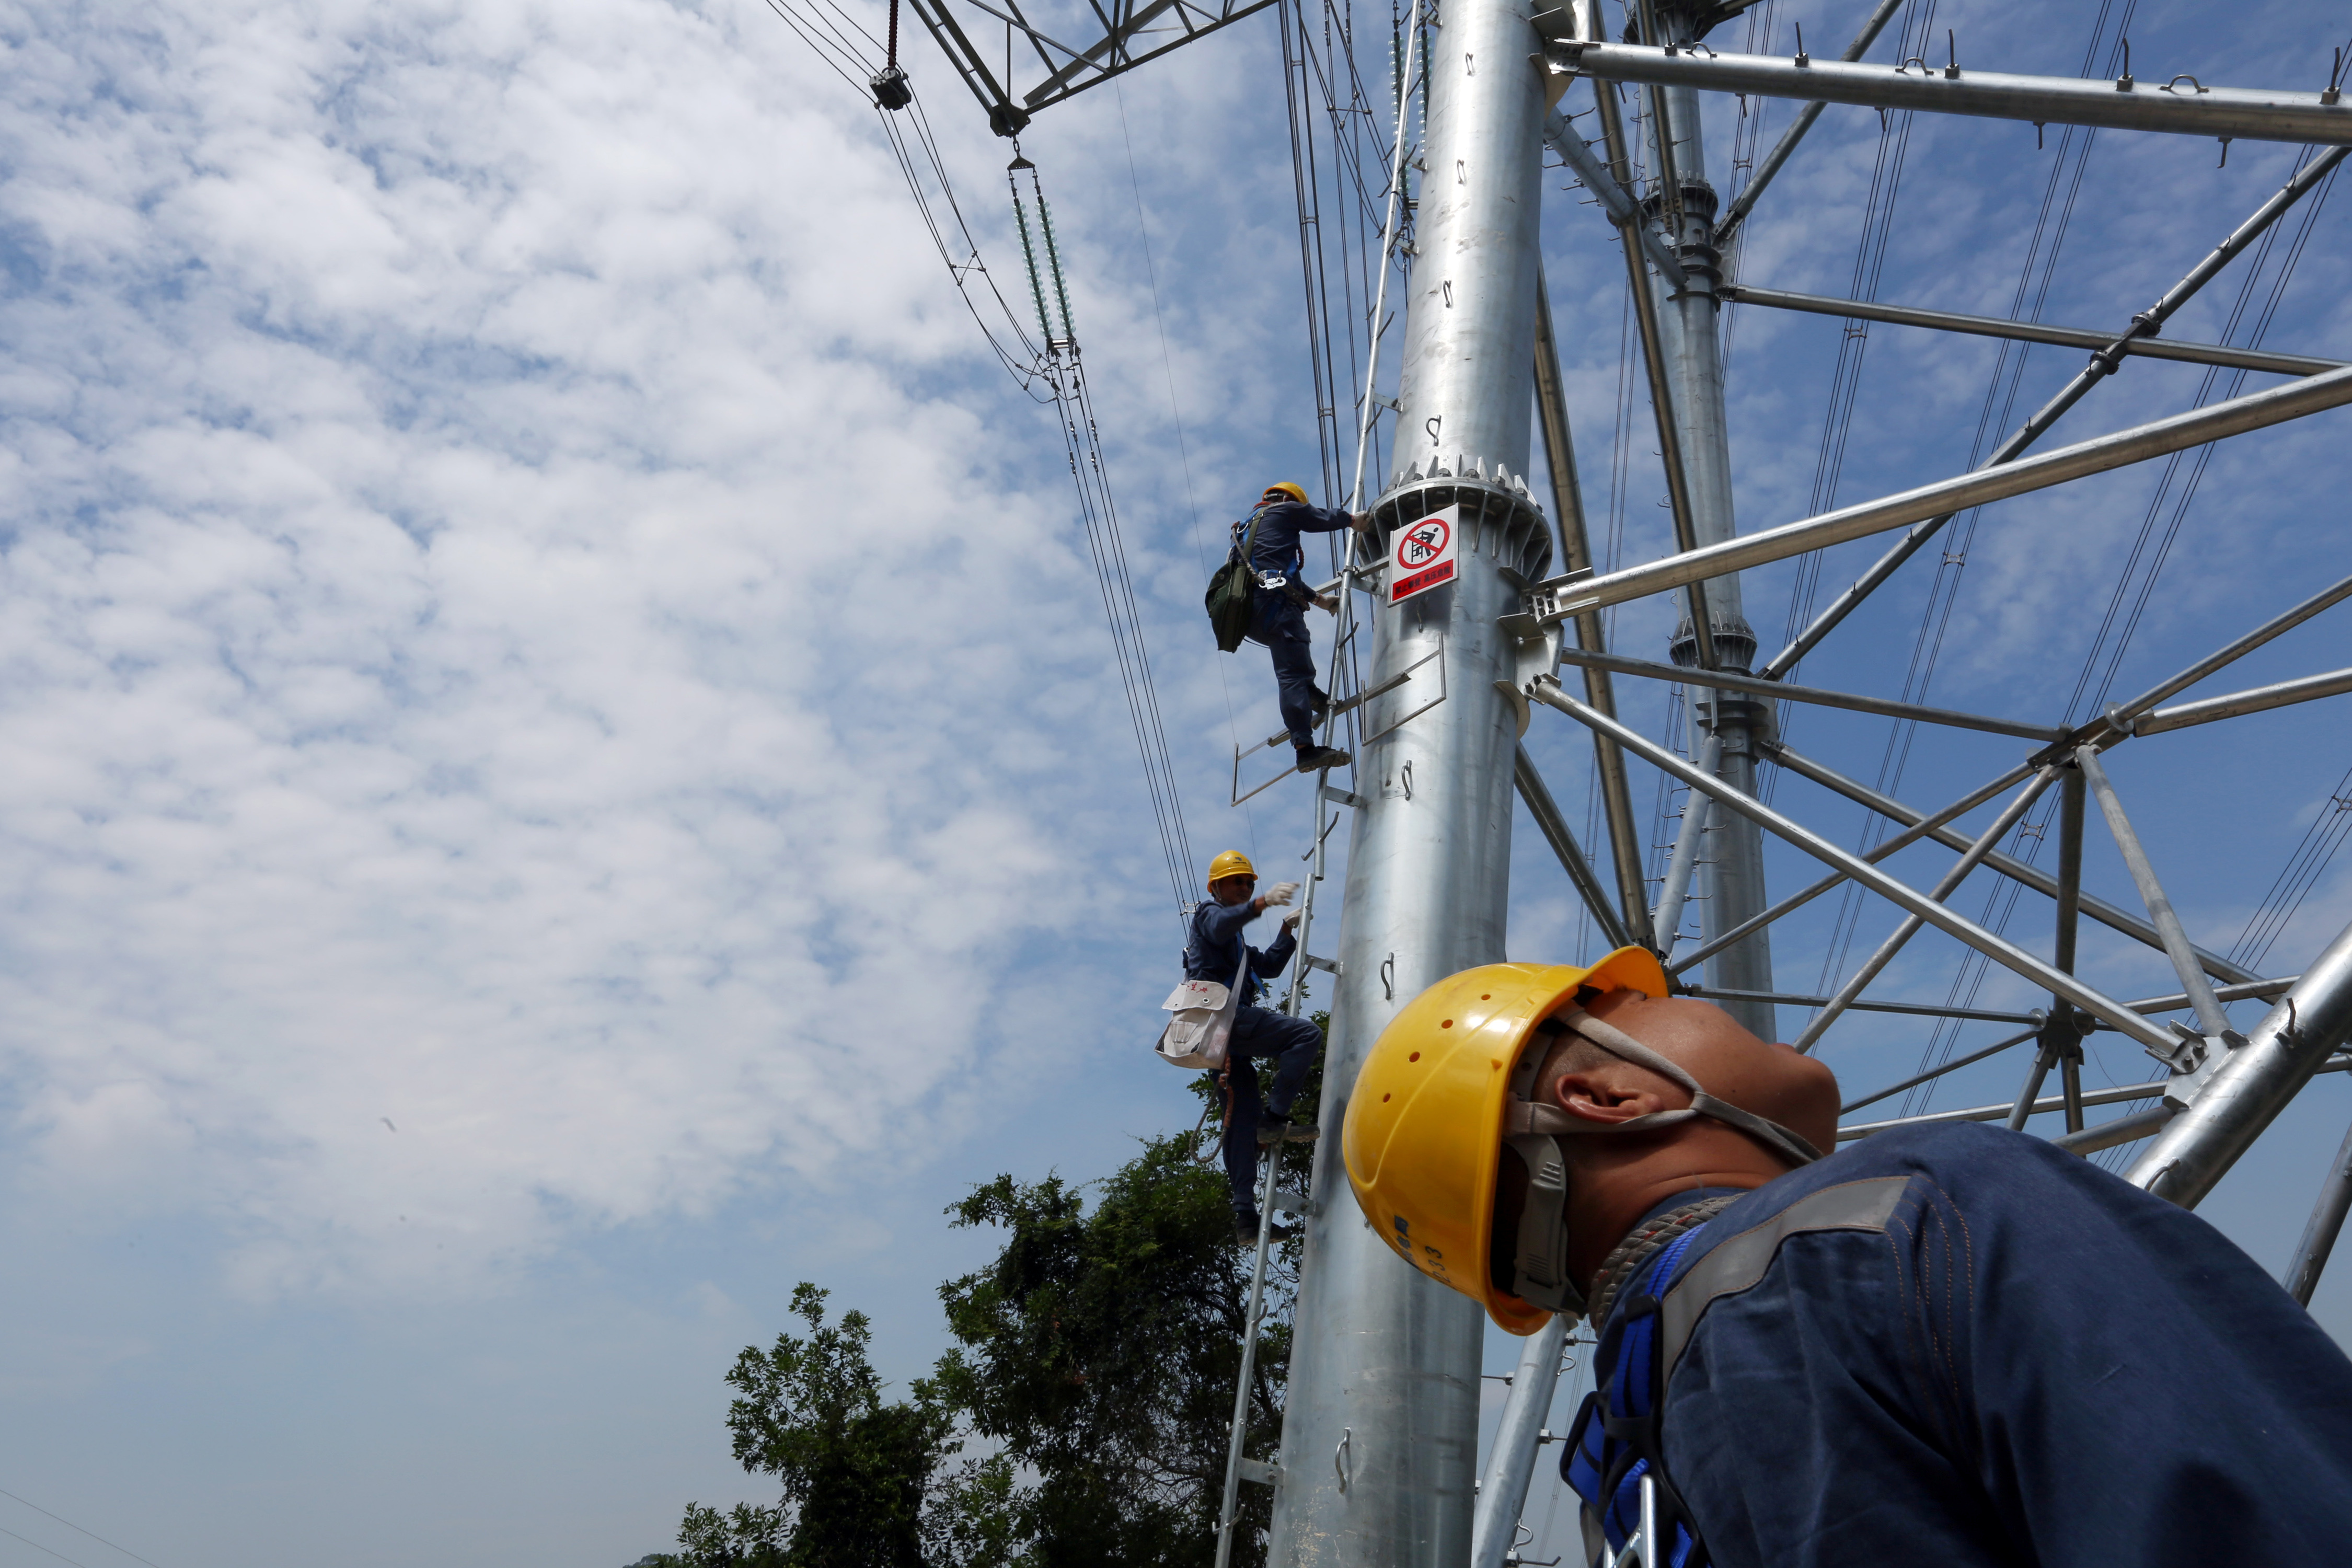 Workers of grid operator China Southern Power Grid climb a transmission tower to inspect power cables in Dongguan